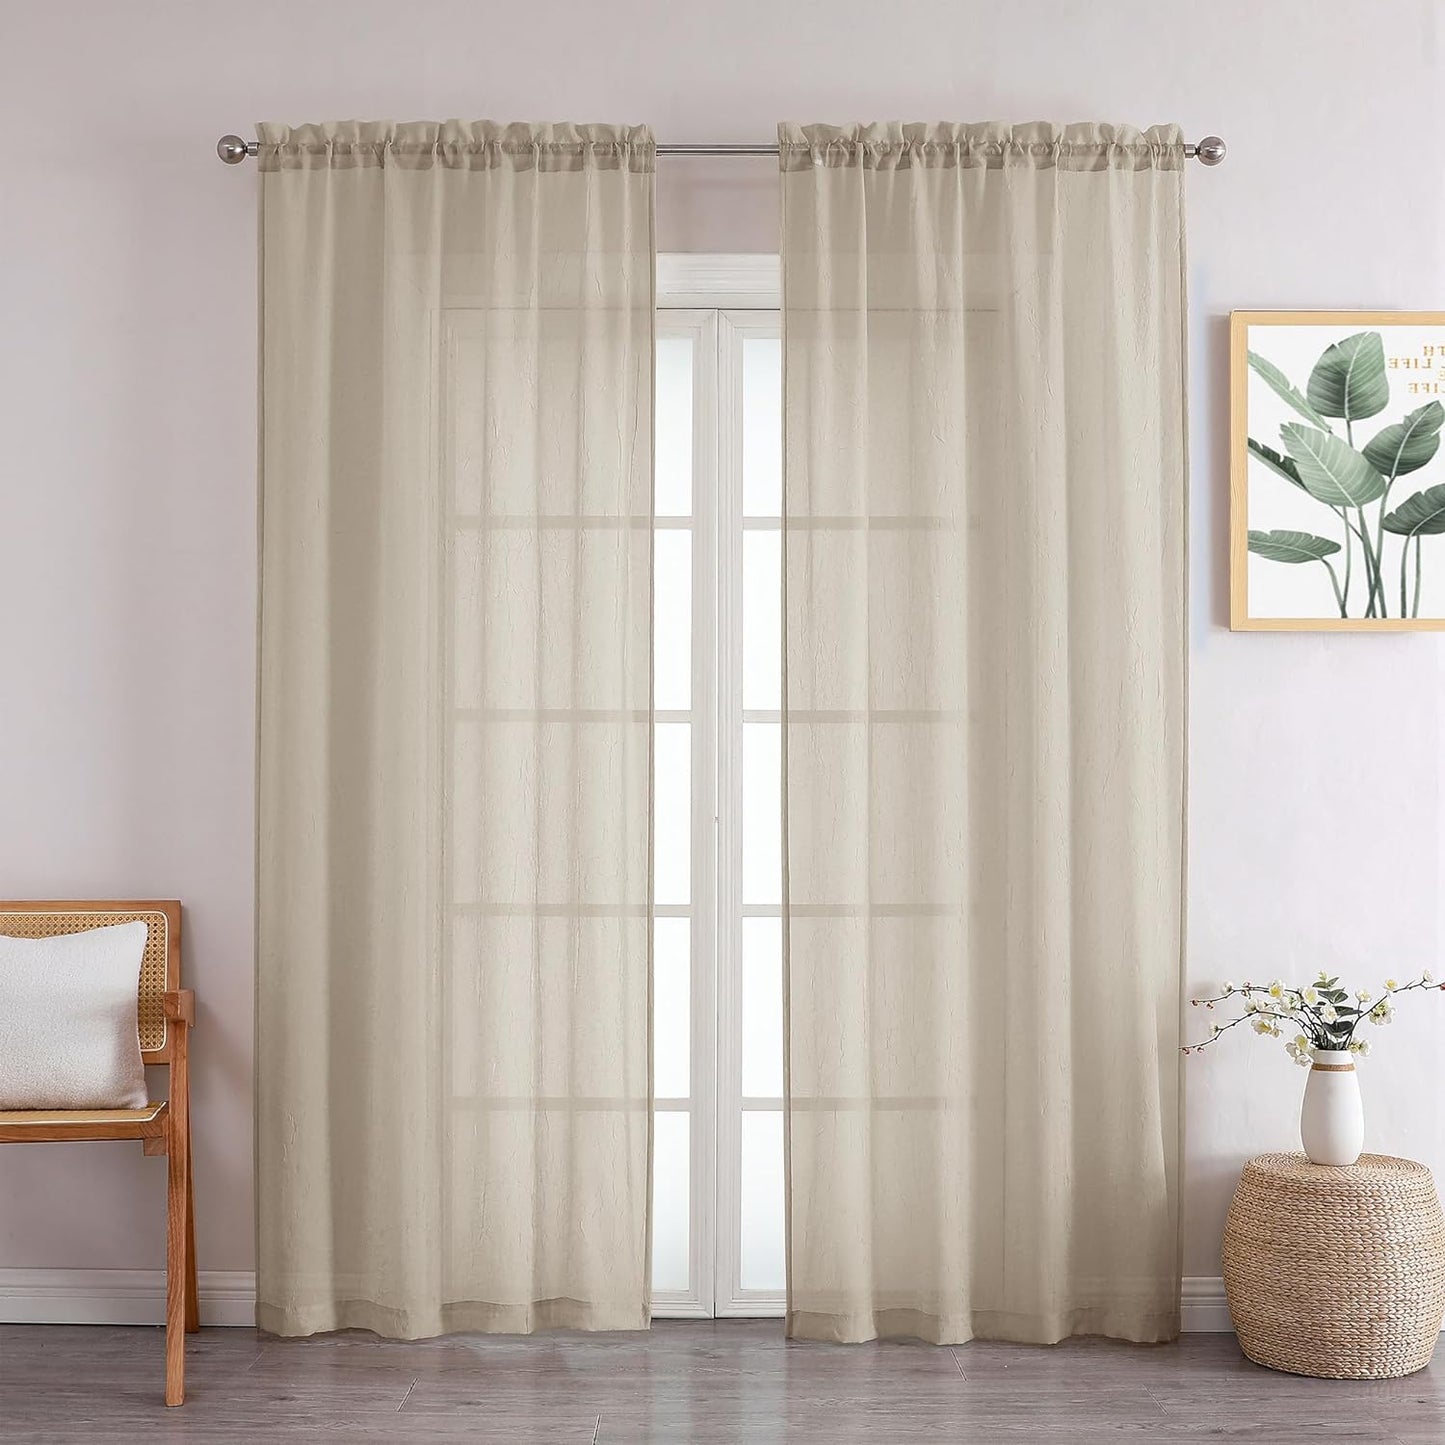 Chyhomenyc Crushed White Sheer Valances for Window 14 Inch Length 2 PCS, Crinkle Voile Short Kitchen Curtains with Dual Rod Pockets，Gauzy Bedroom Curtain Valance，Each 42Wx14L Inches  Chyhomenyc Taupe 42 W X 84 L 